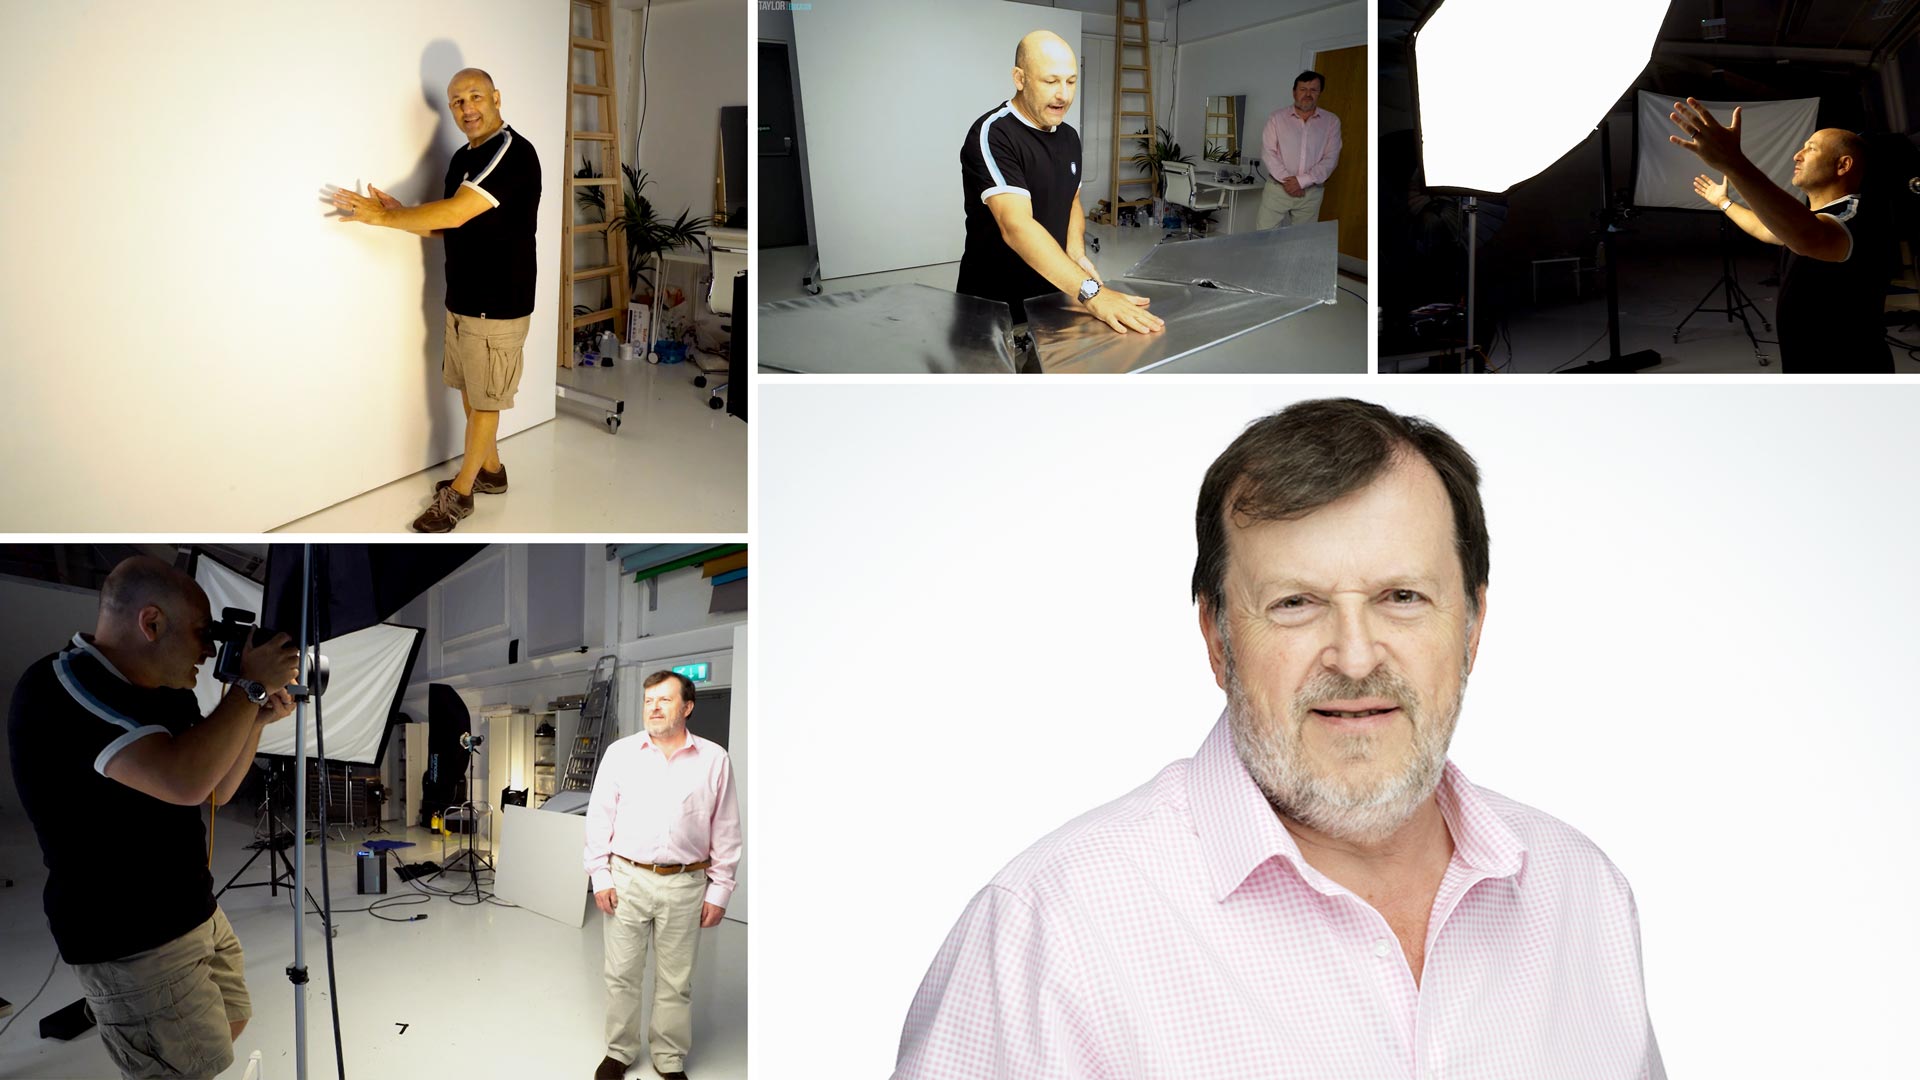 Clamshell Lighting for White Background Business Portraits